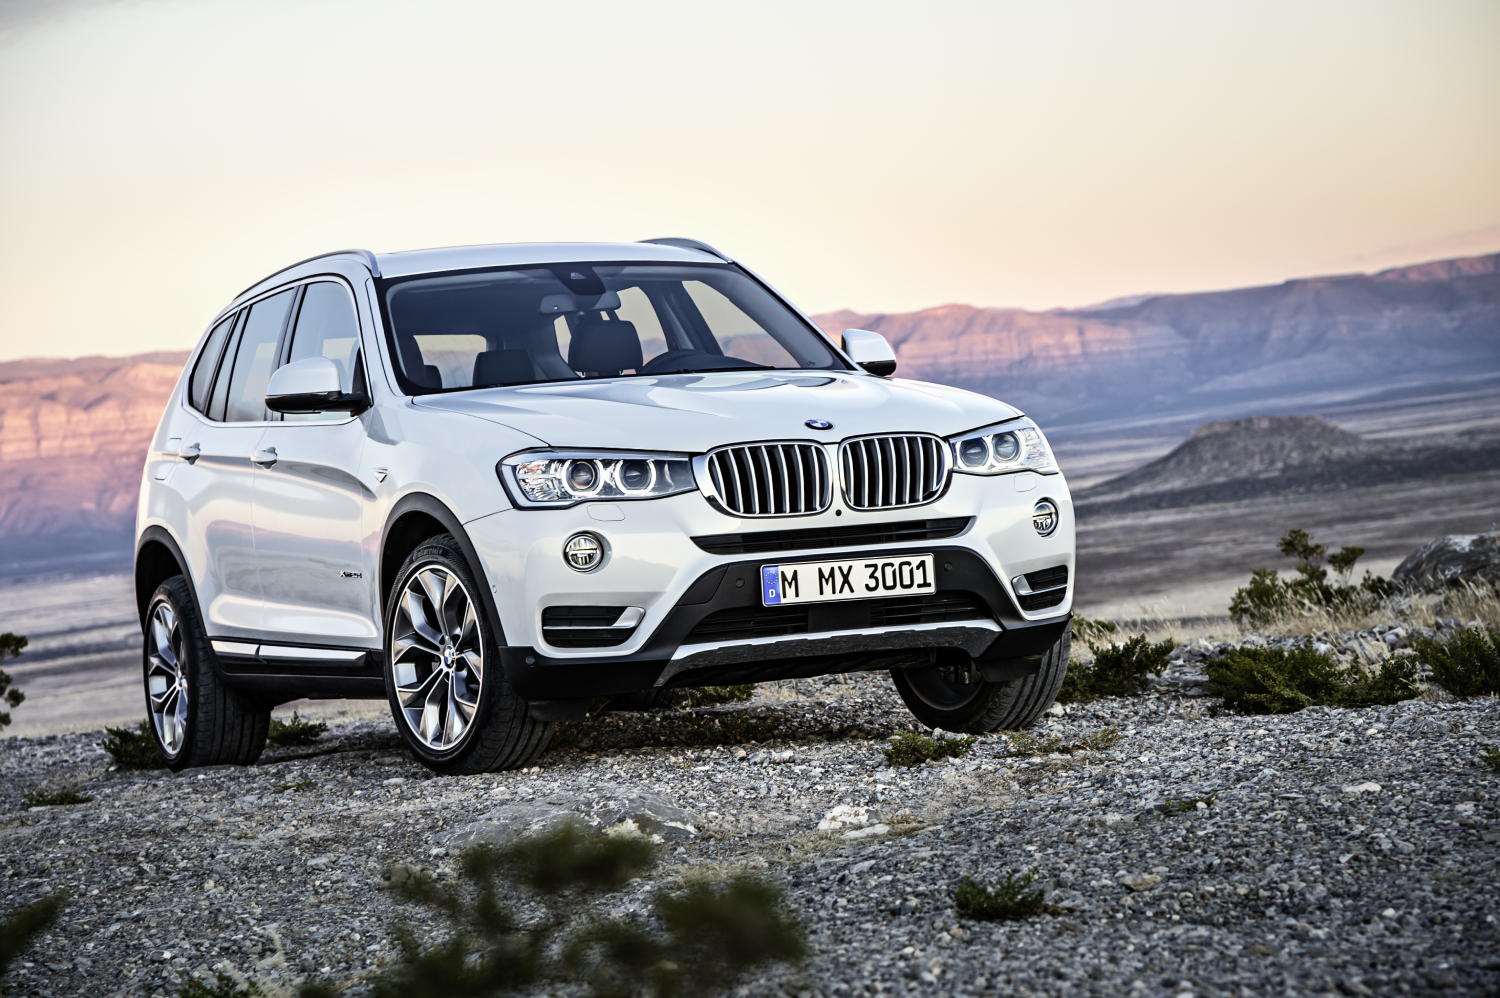 Consumer Reports says to avoid the 2014 BMW X3 used luxury SUV like the one pictured here | BMW